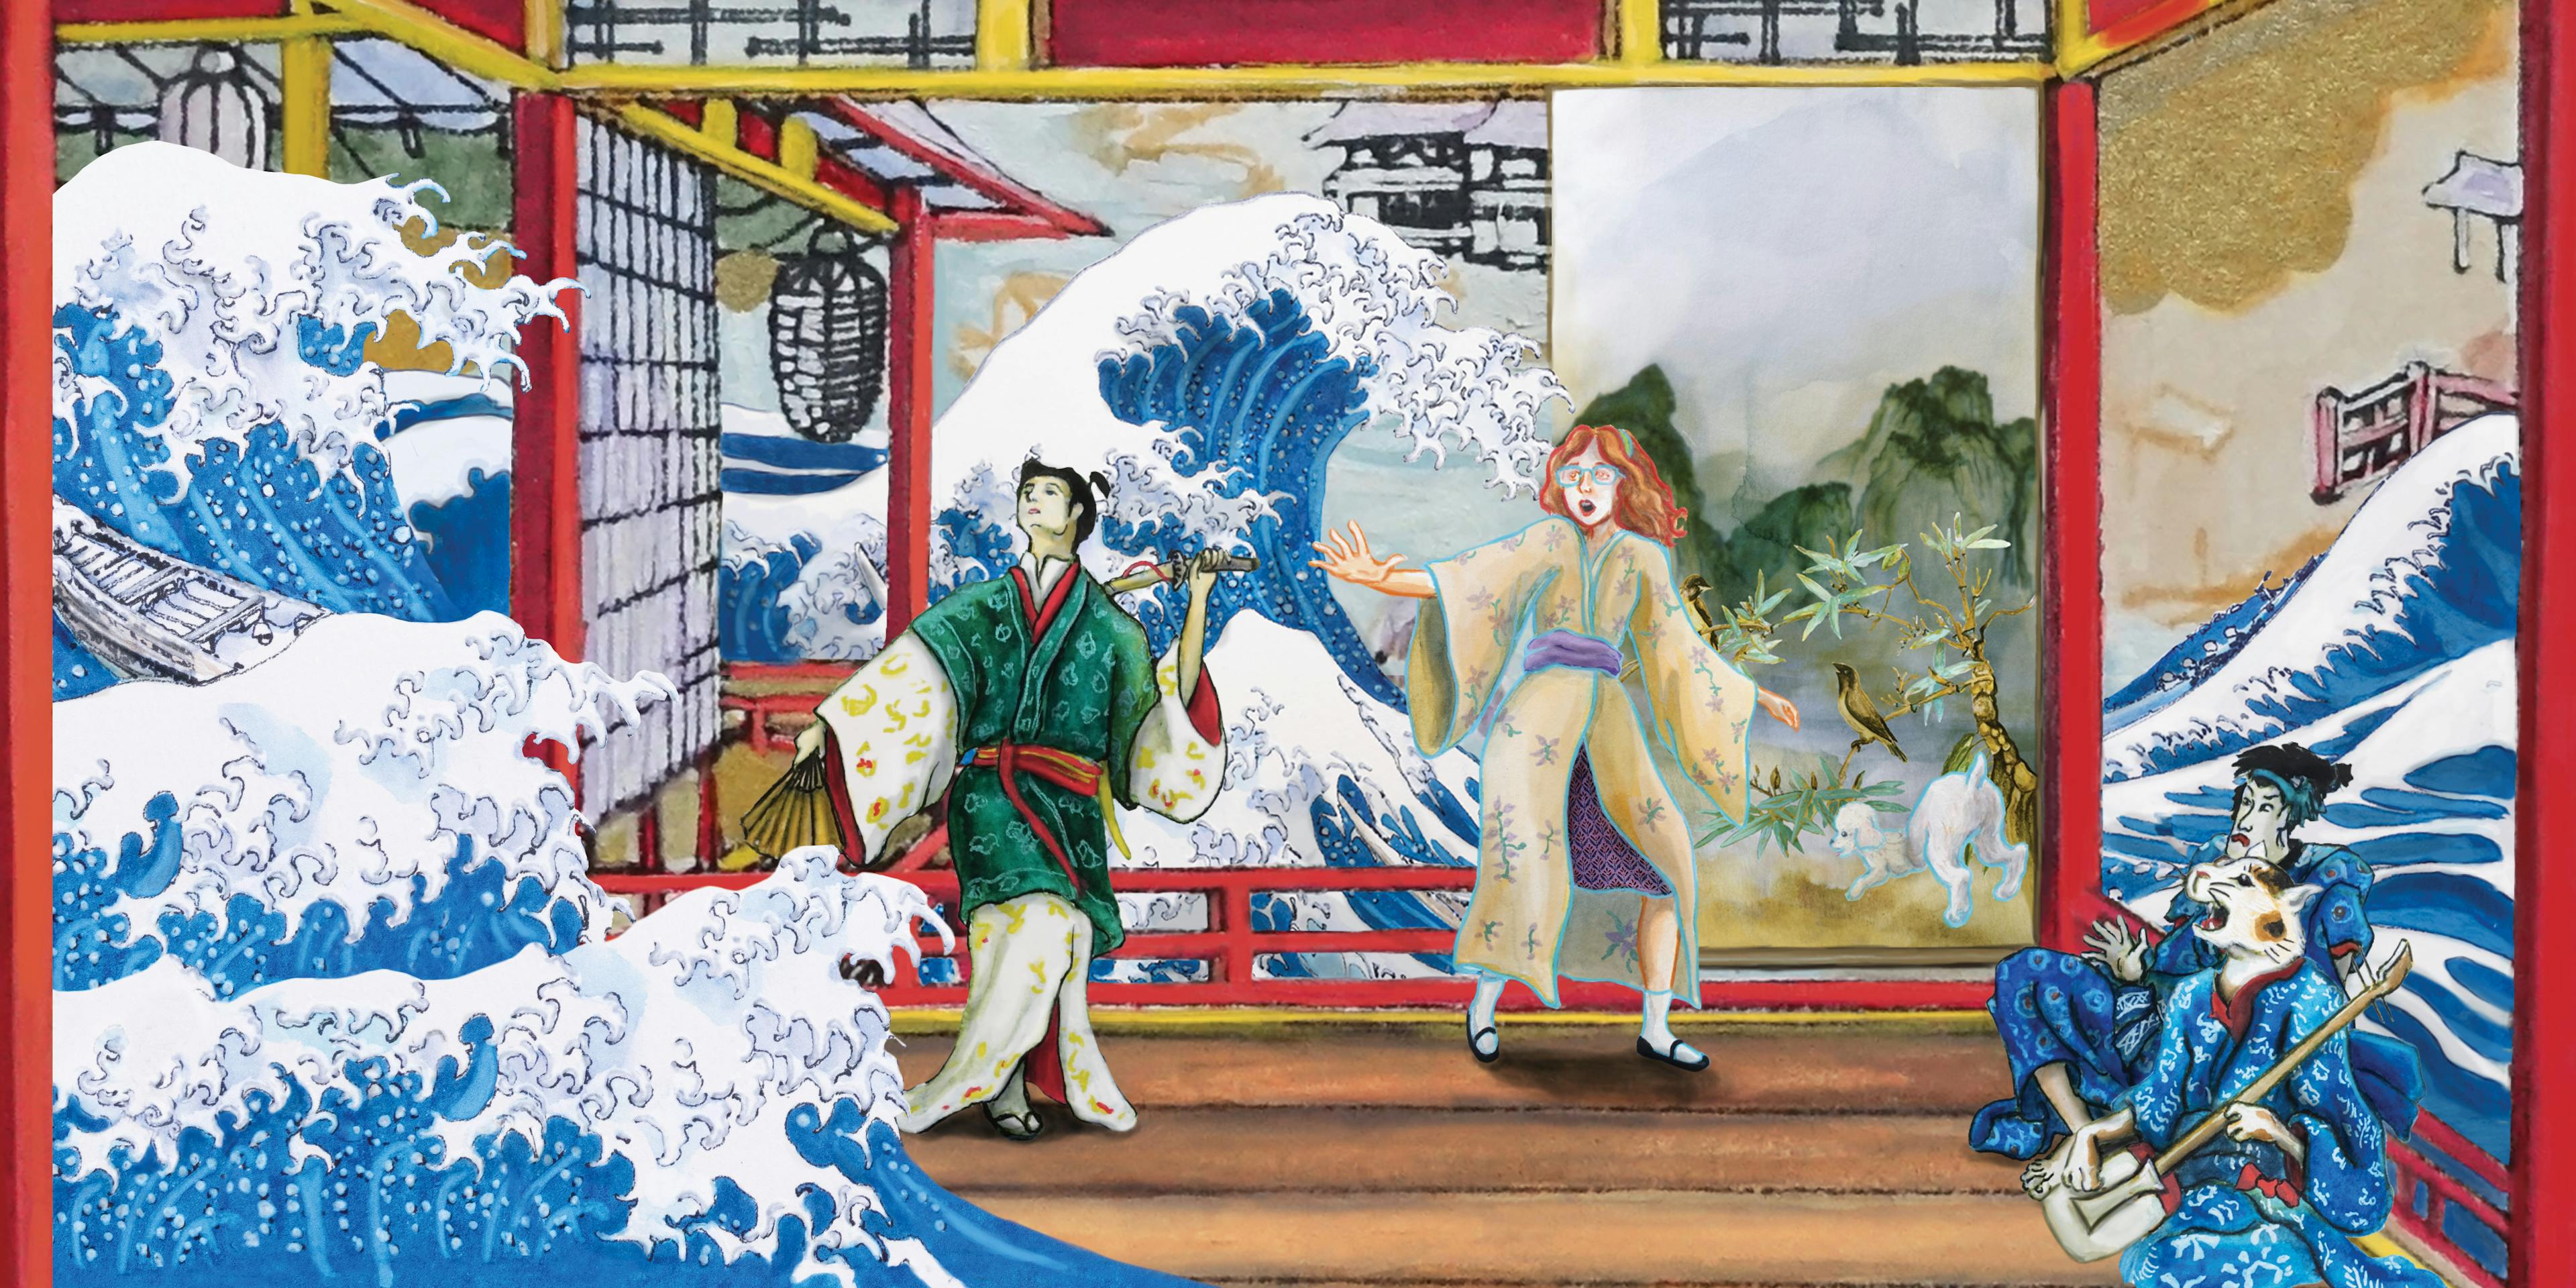 The moment when a Hokusai inspired tsunami forces our characters to leave Ukiyo-e Japan